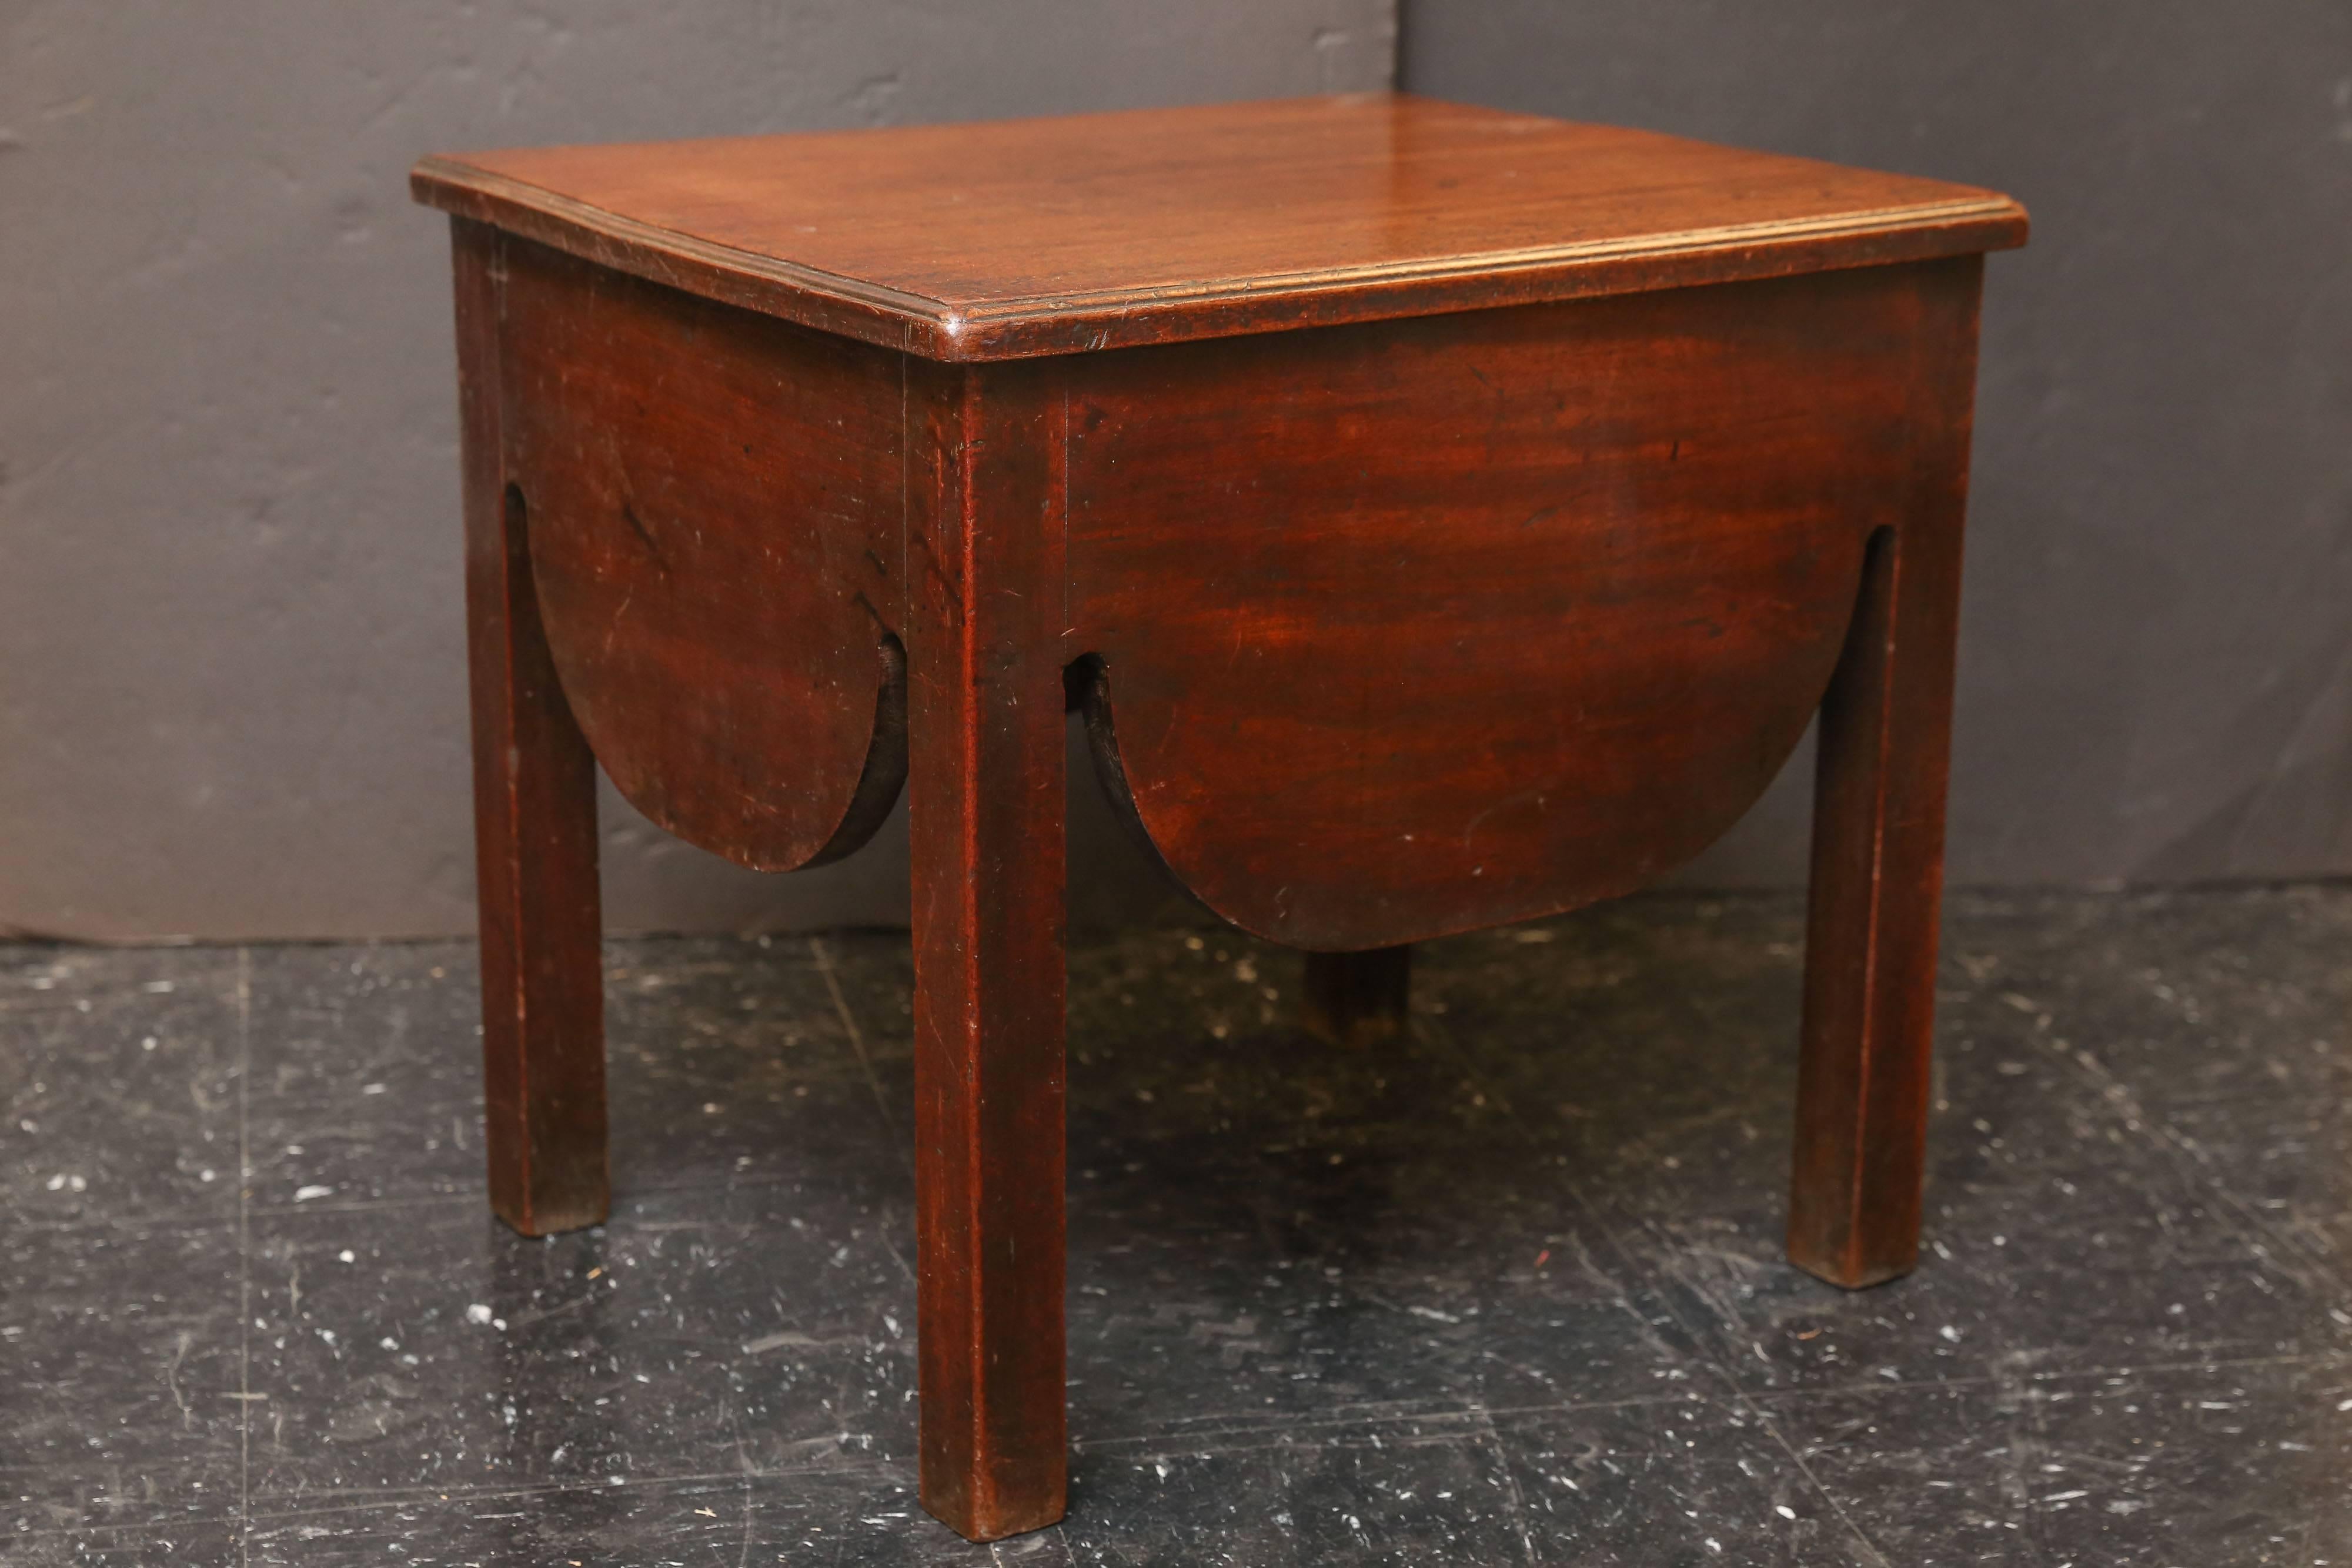 Great Britain (UK) 19th Century Small Side Table